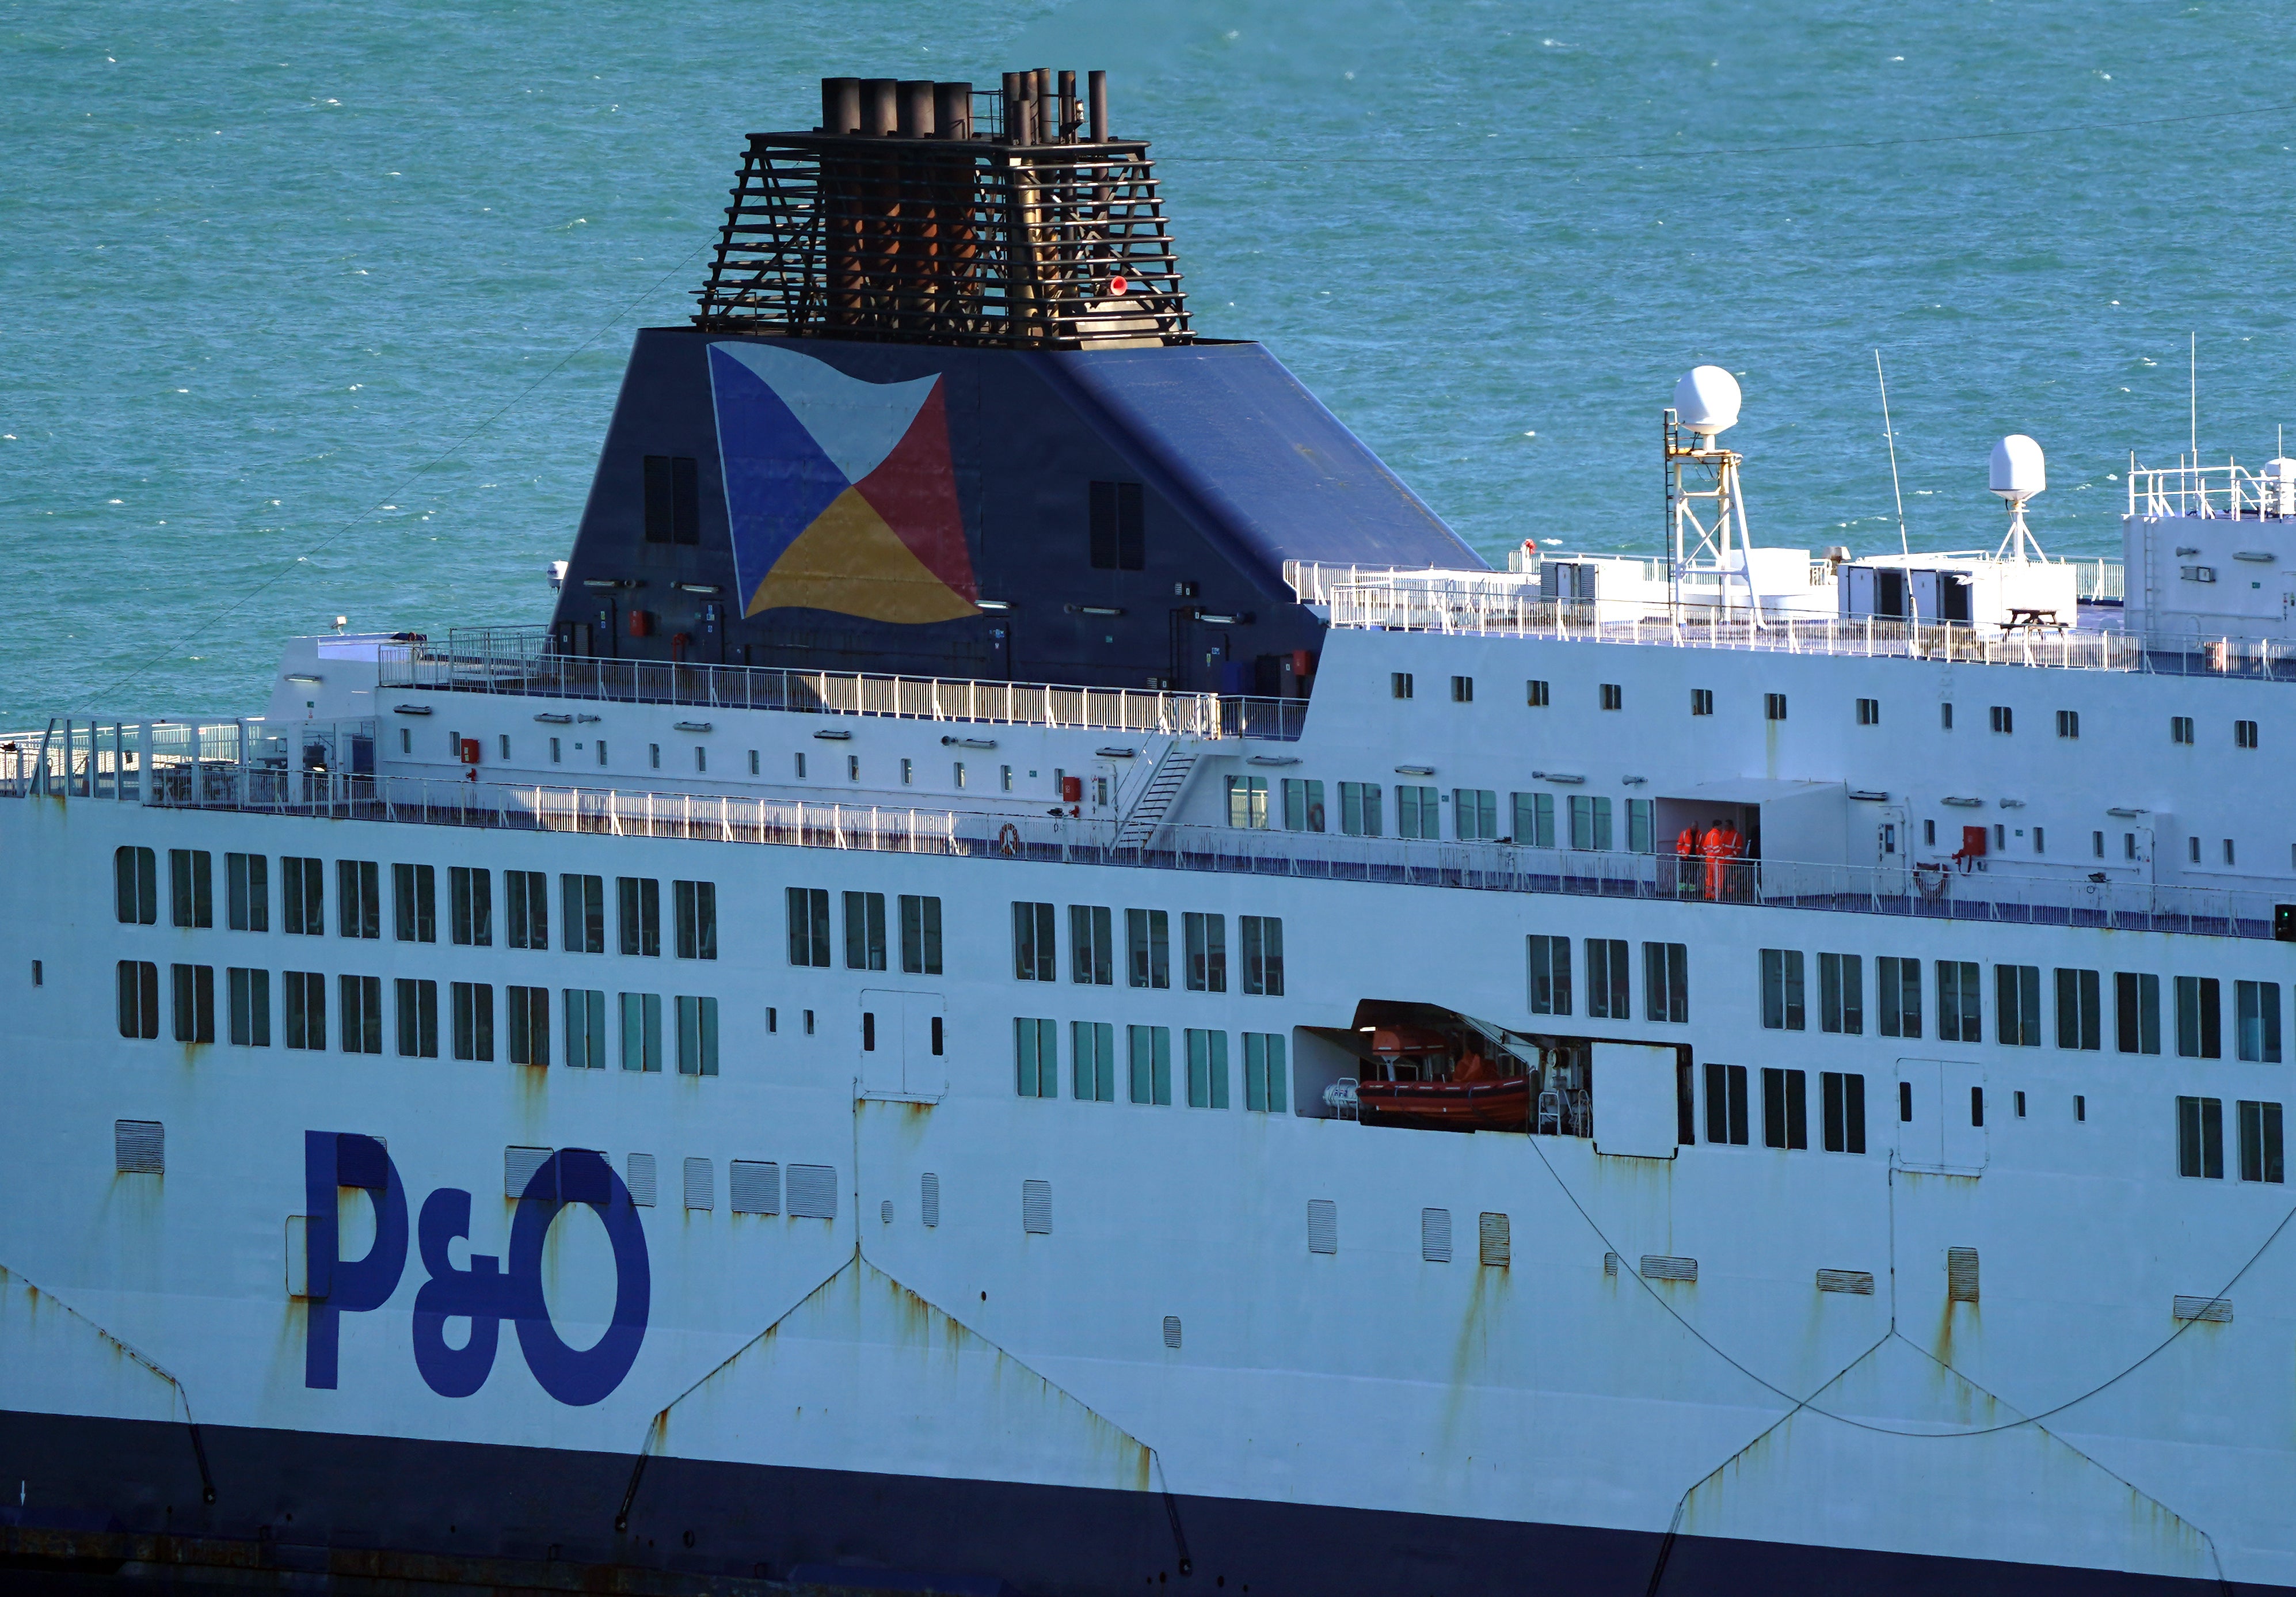 P&O Ferries suspended sailings and handed 800 seafarers immediate severance notices